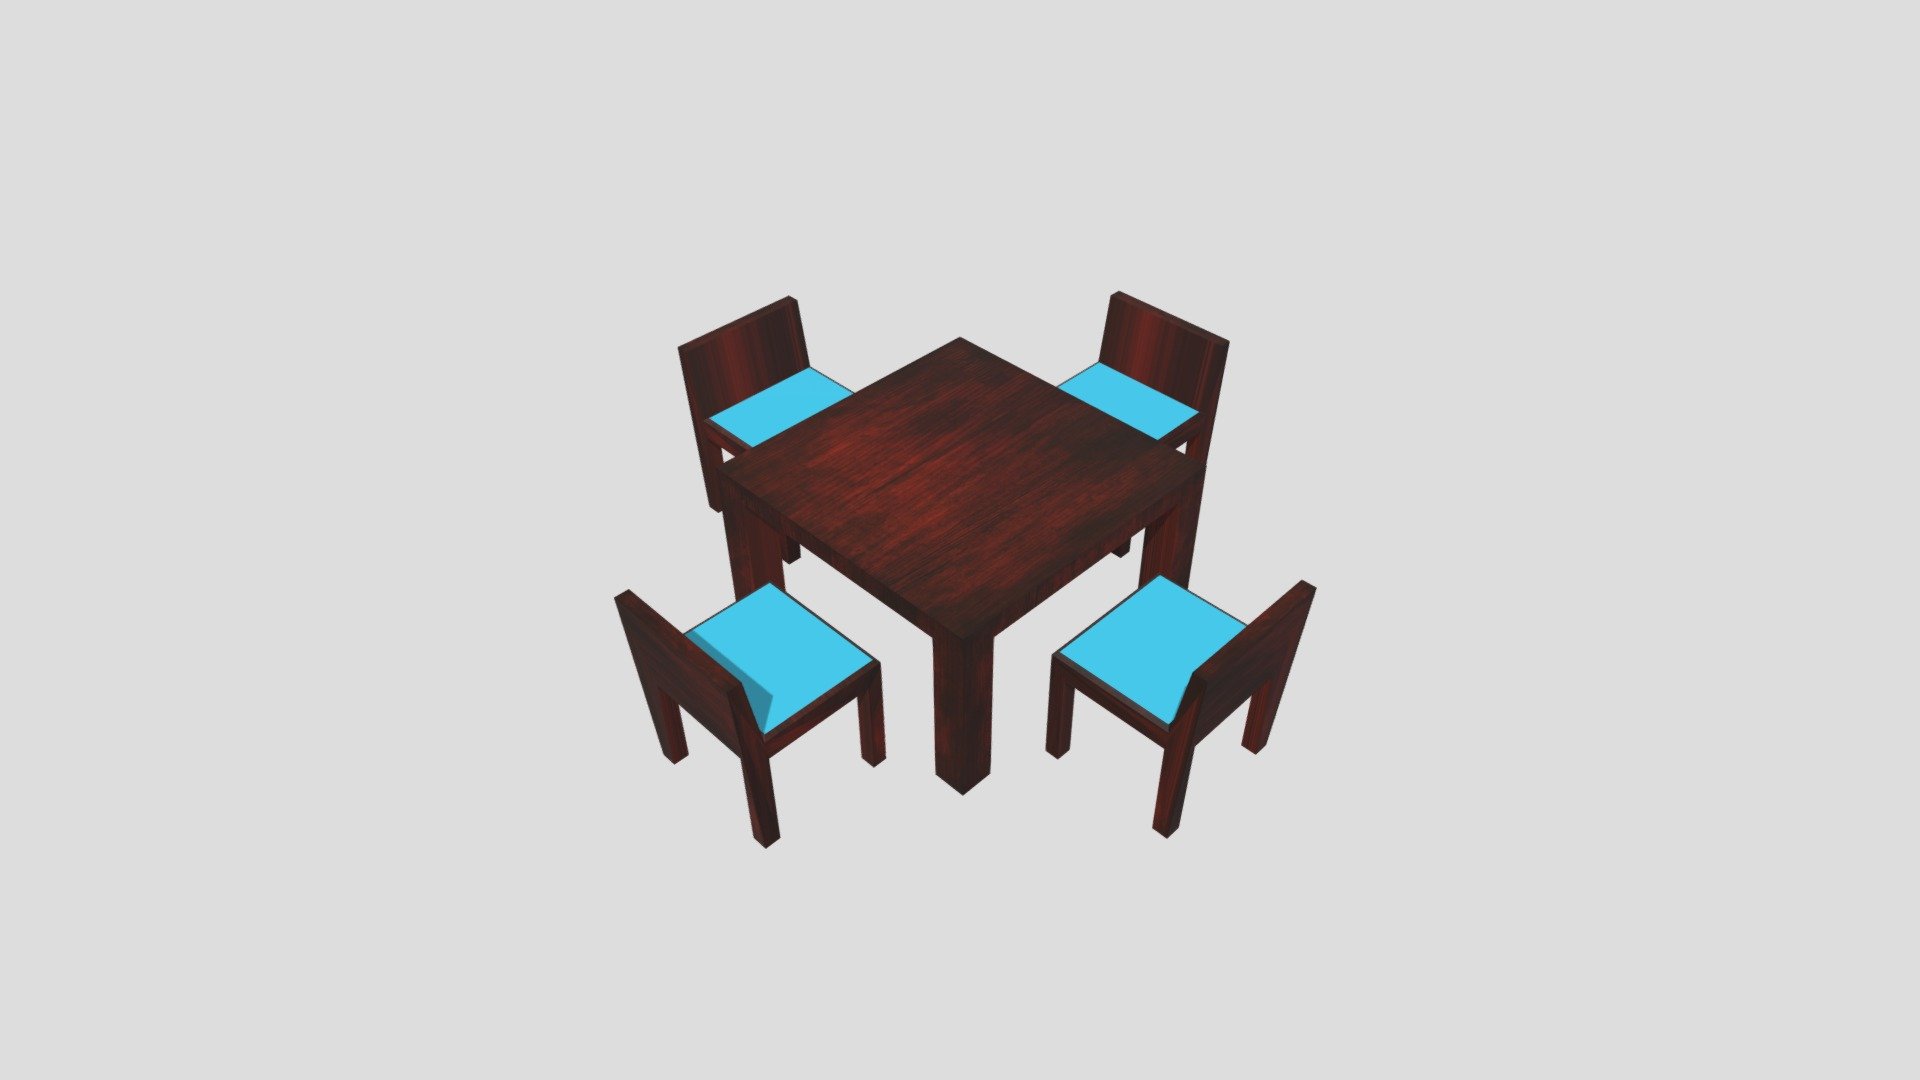 Square Cherry Wood Table with Four Chairs, Teal Seats. Perfect for a coffee shop or small kitchen scene 3d model